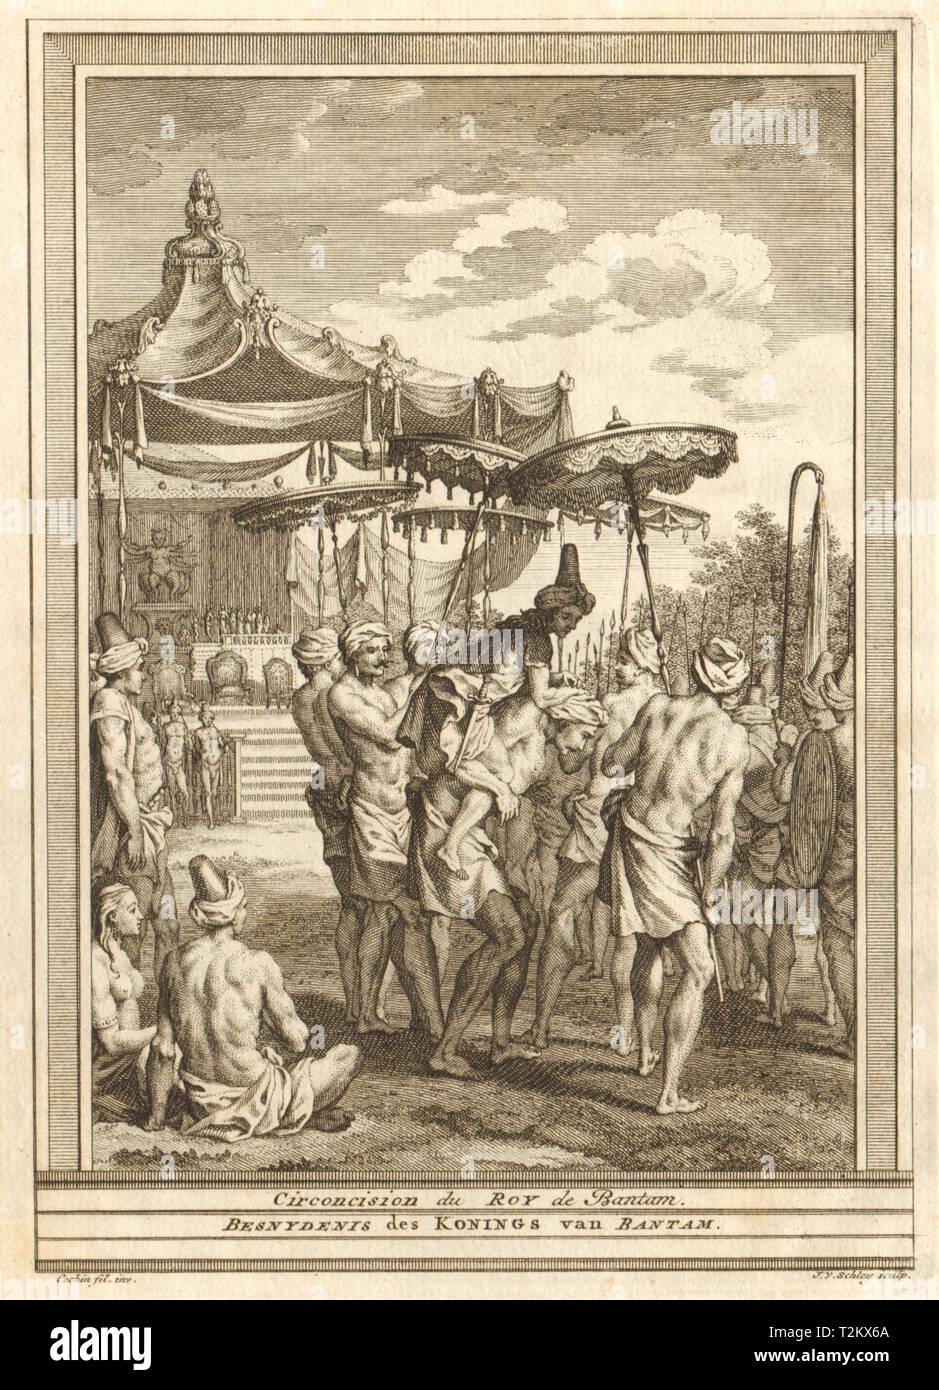 Circumcision of the King or Sultan of Banten (Bantam), Java. SCHLEY 1747 print Stock Photo